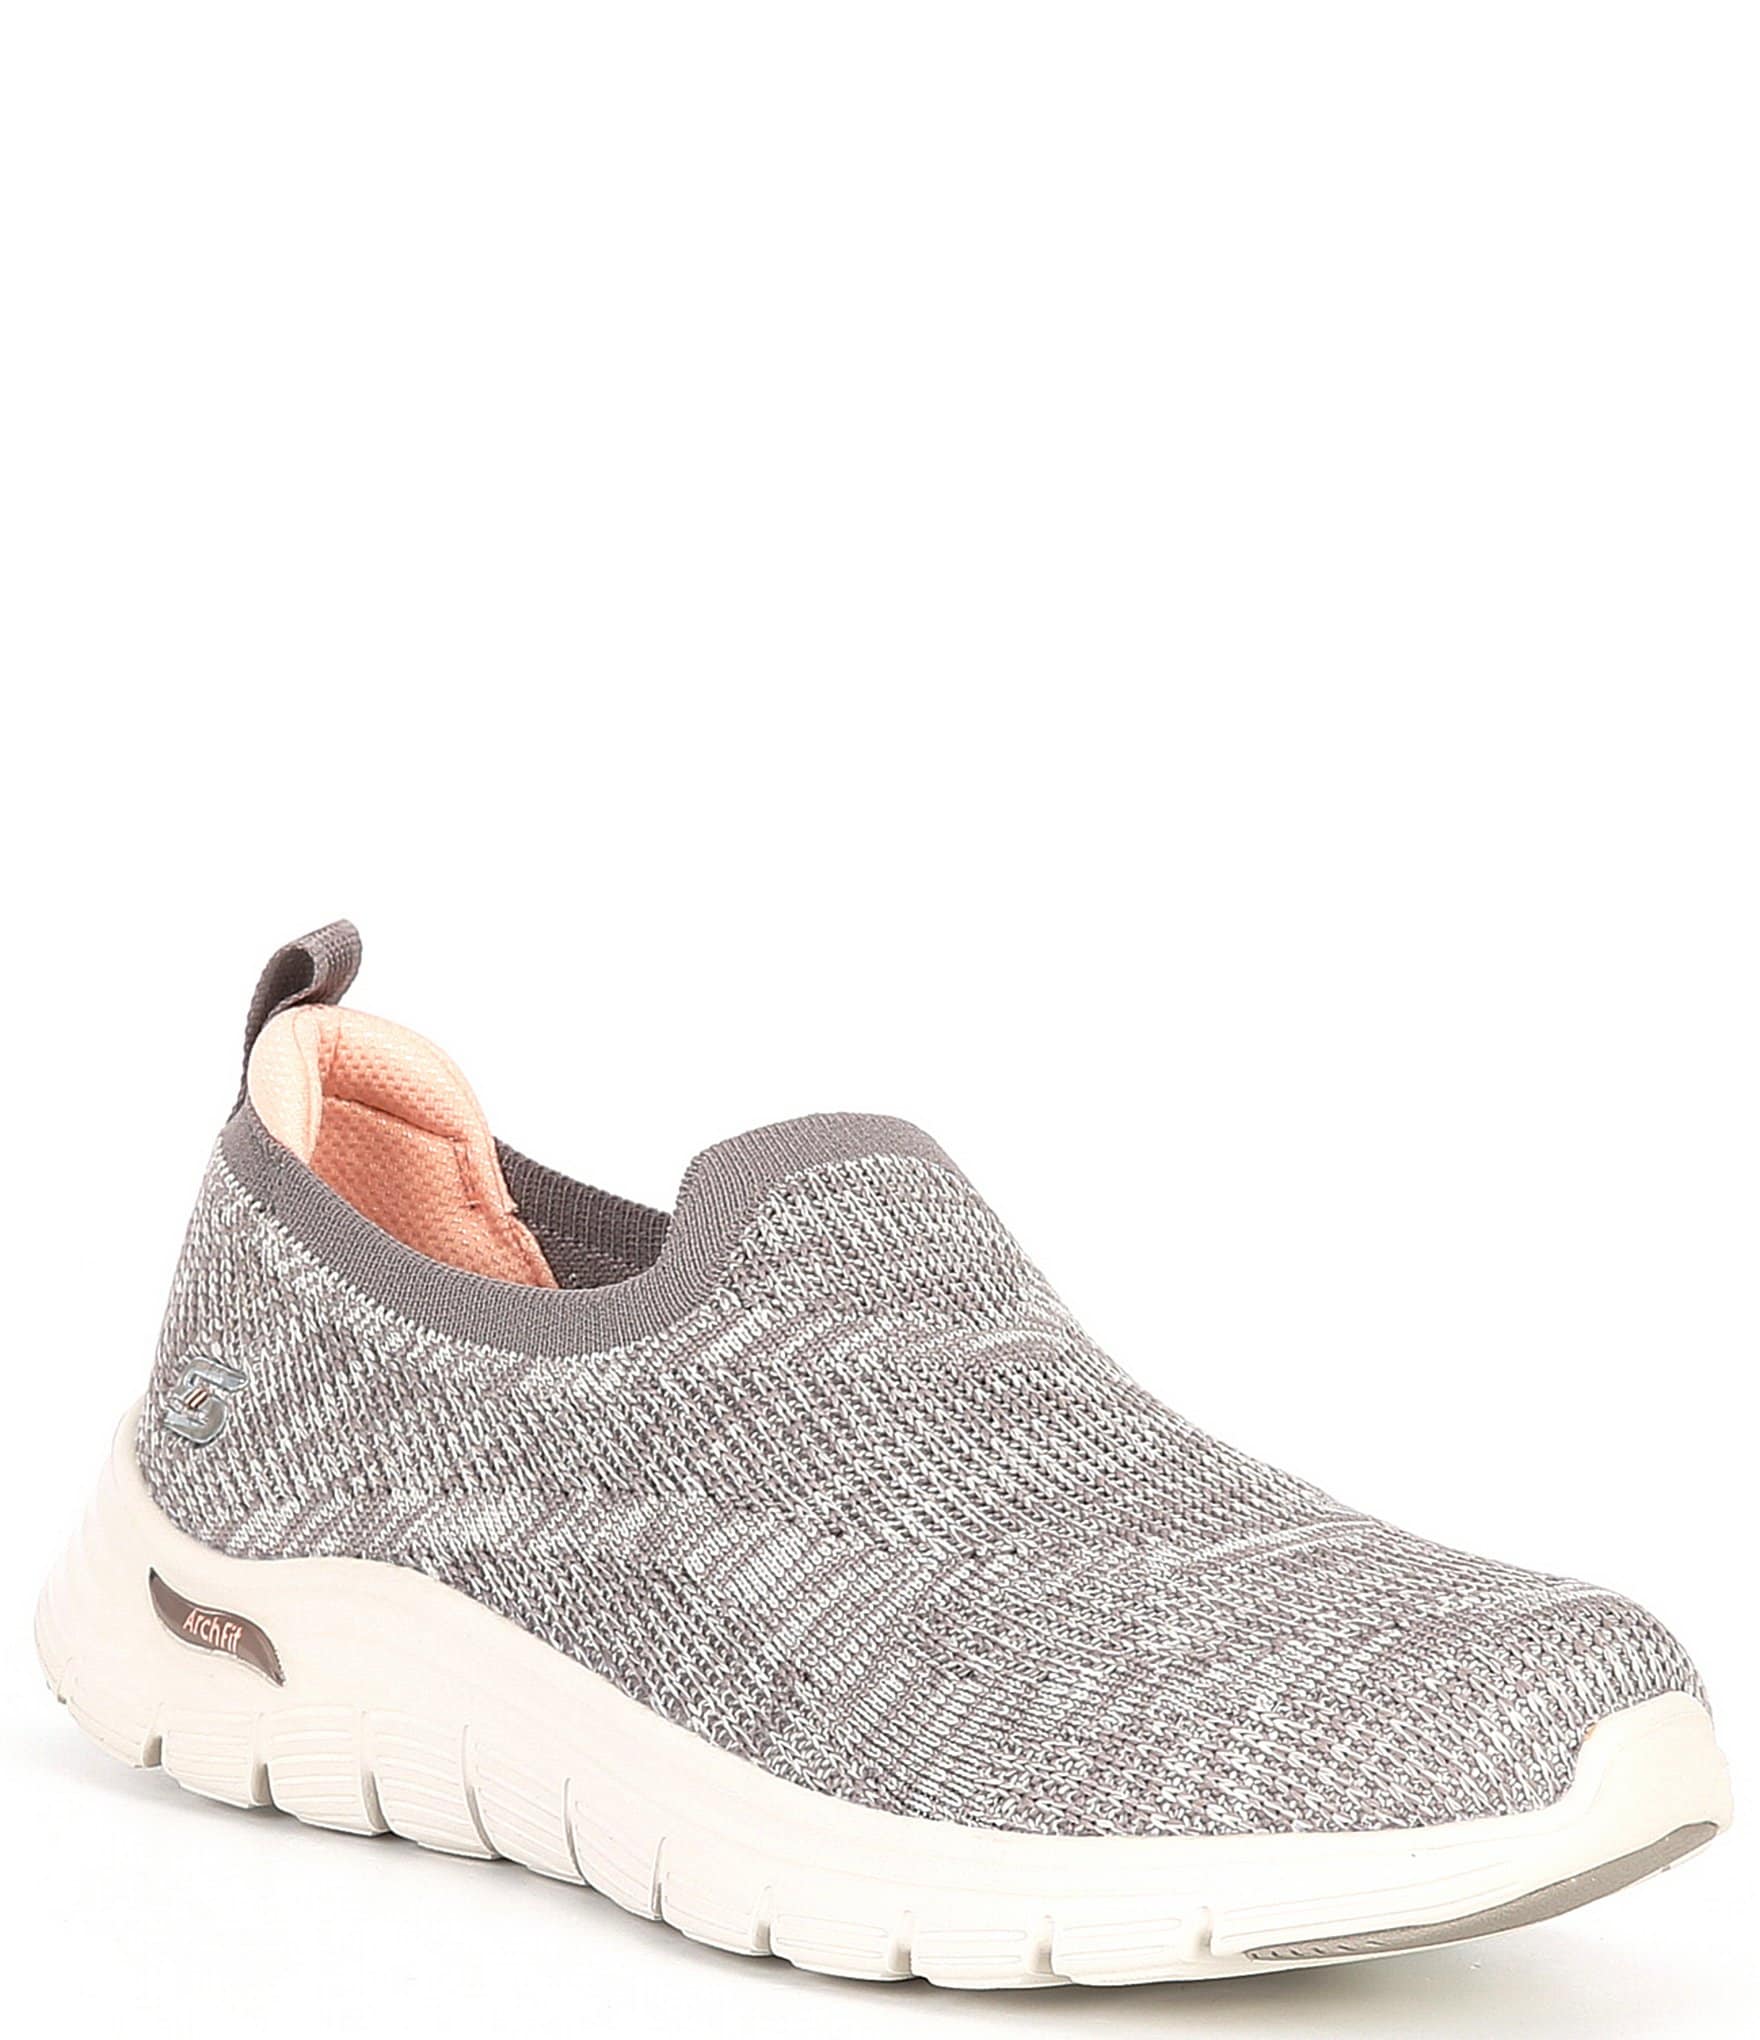 taupe: Women's Sneakers & Athletic Shoes |